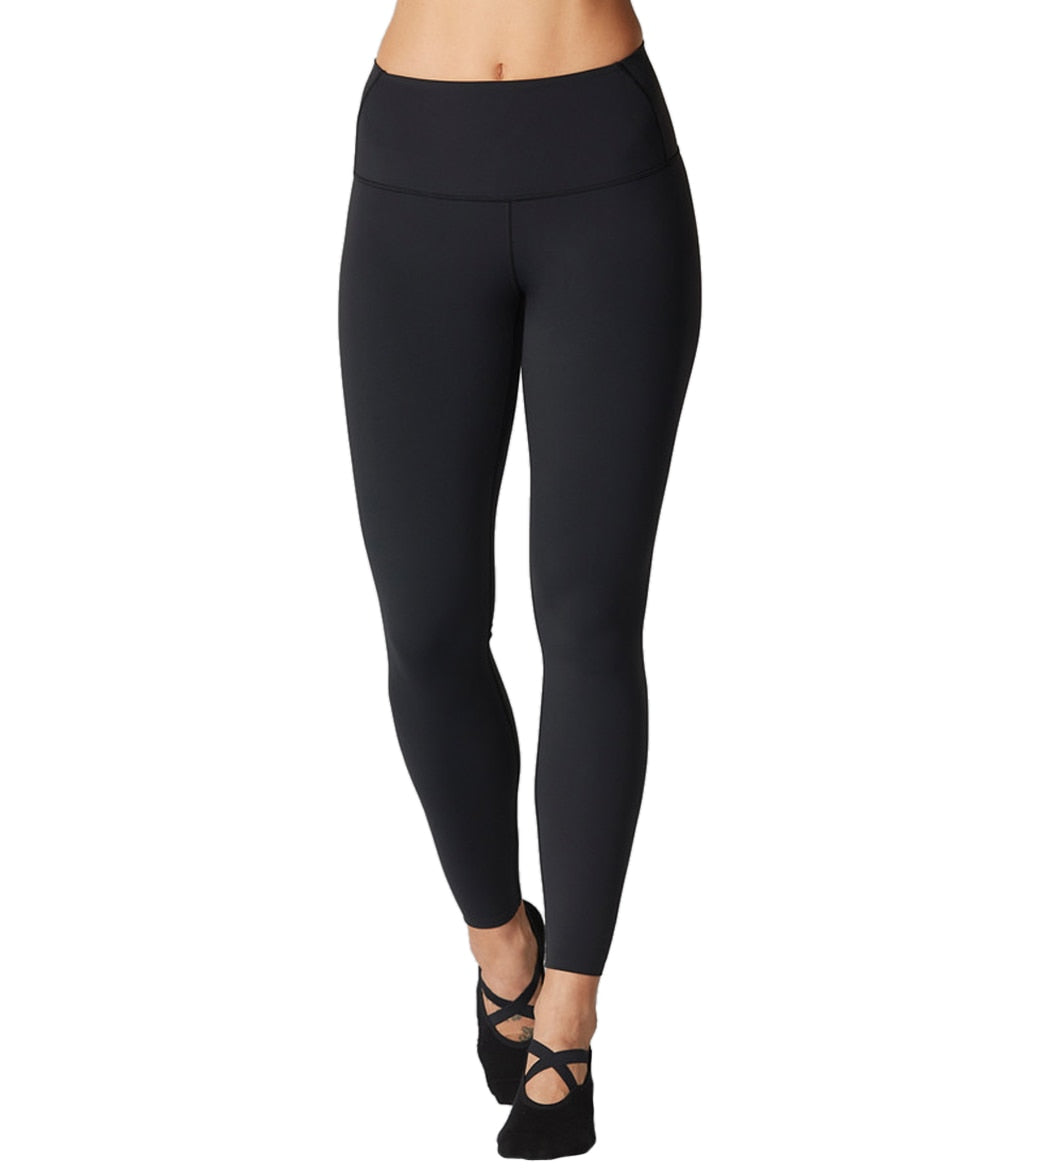 COMFREE Womens Seamless Leggings High Waisted Workout Tight